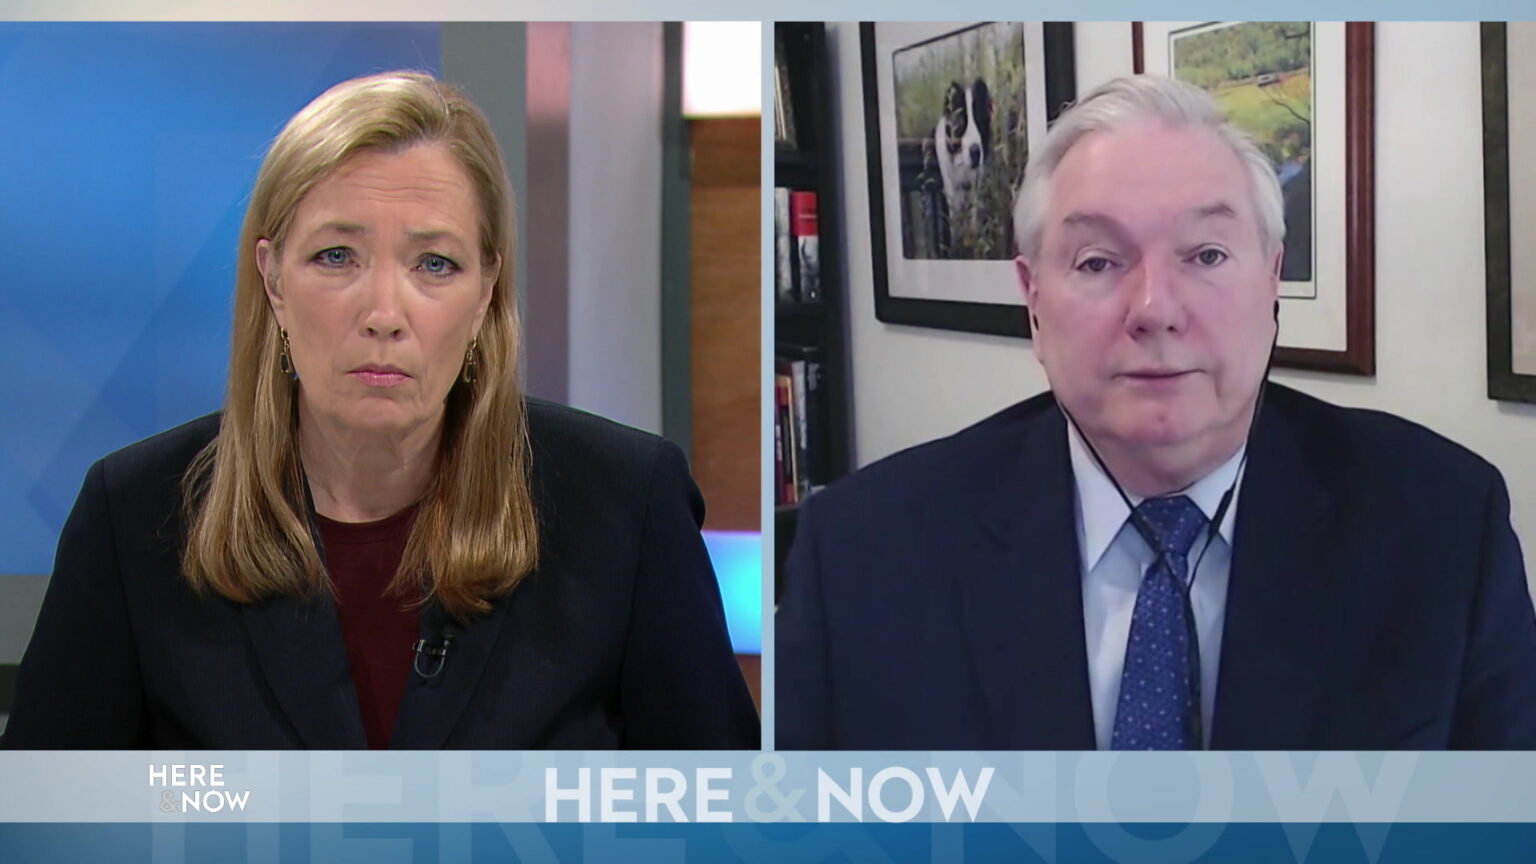 From left to right, a split screen with Frederica Freyberg and Dr. Michael Osterholm seated in different locations